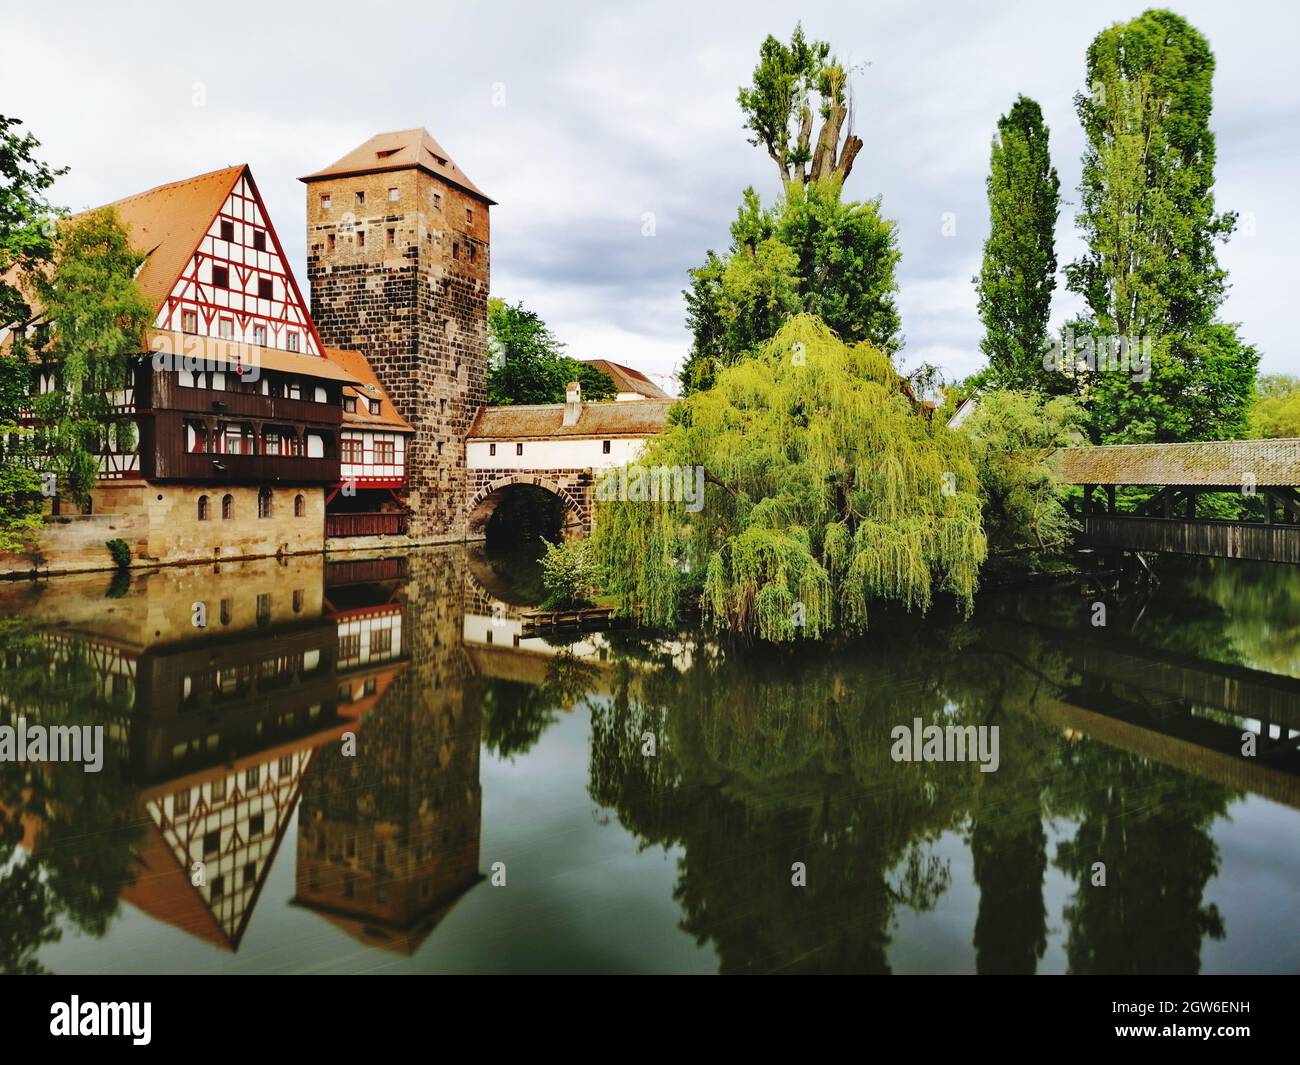 Reflection Of Trees In Lake Against Sky In City Of Touristic Spot In Nuremberg Stock Photo